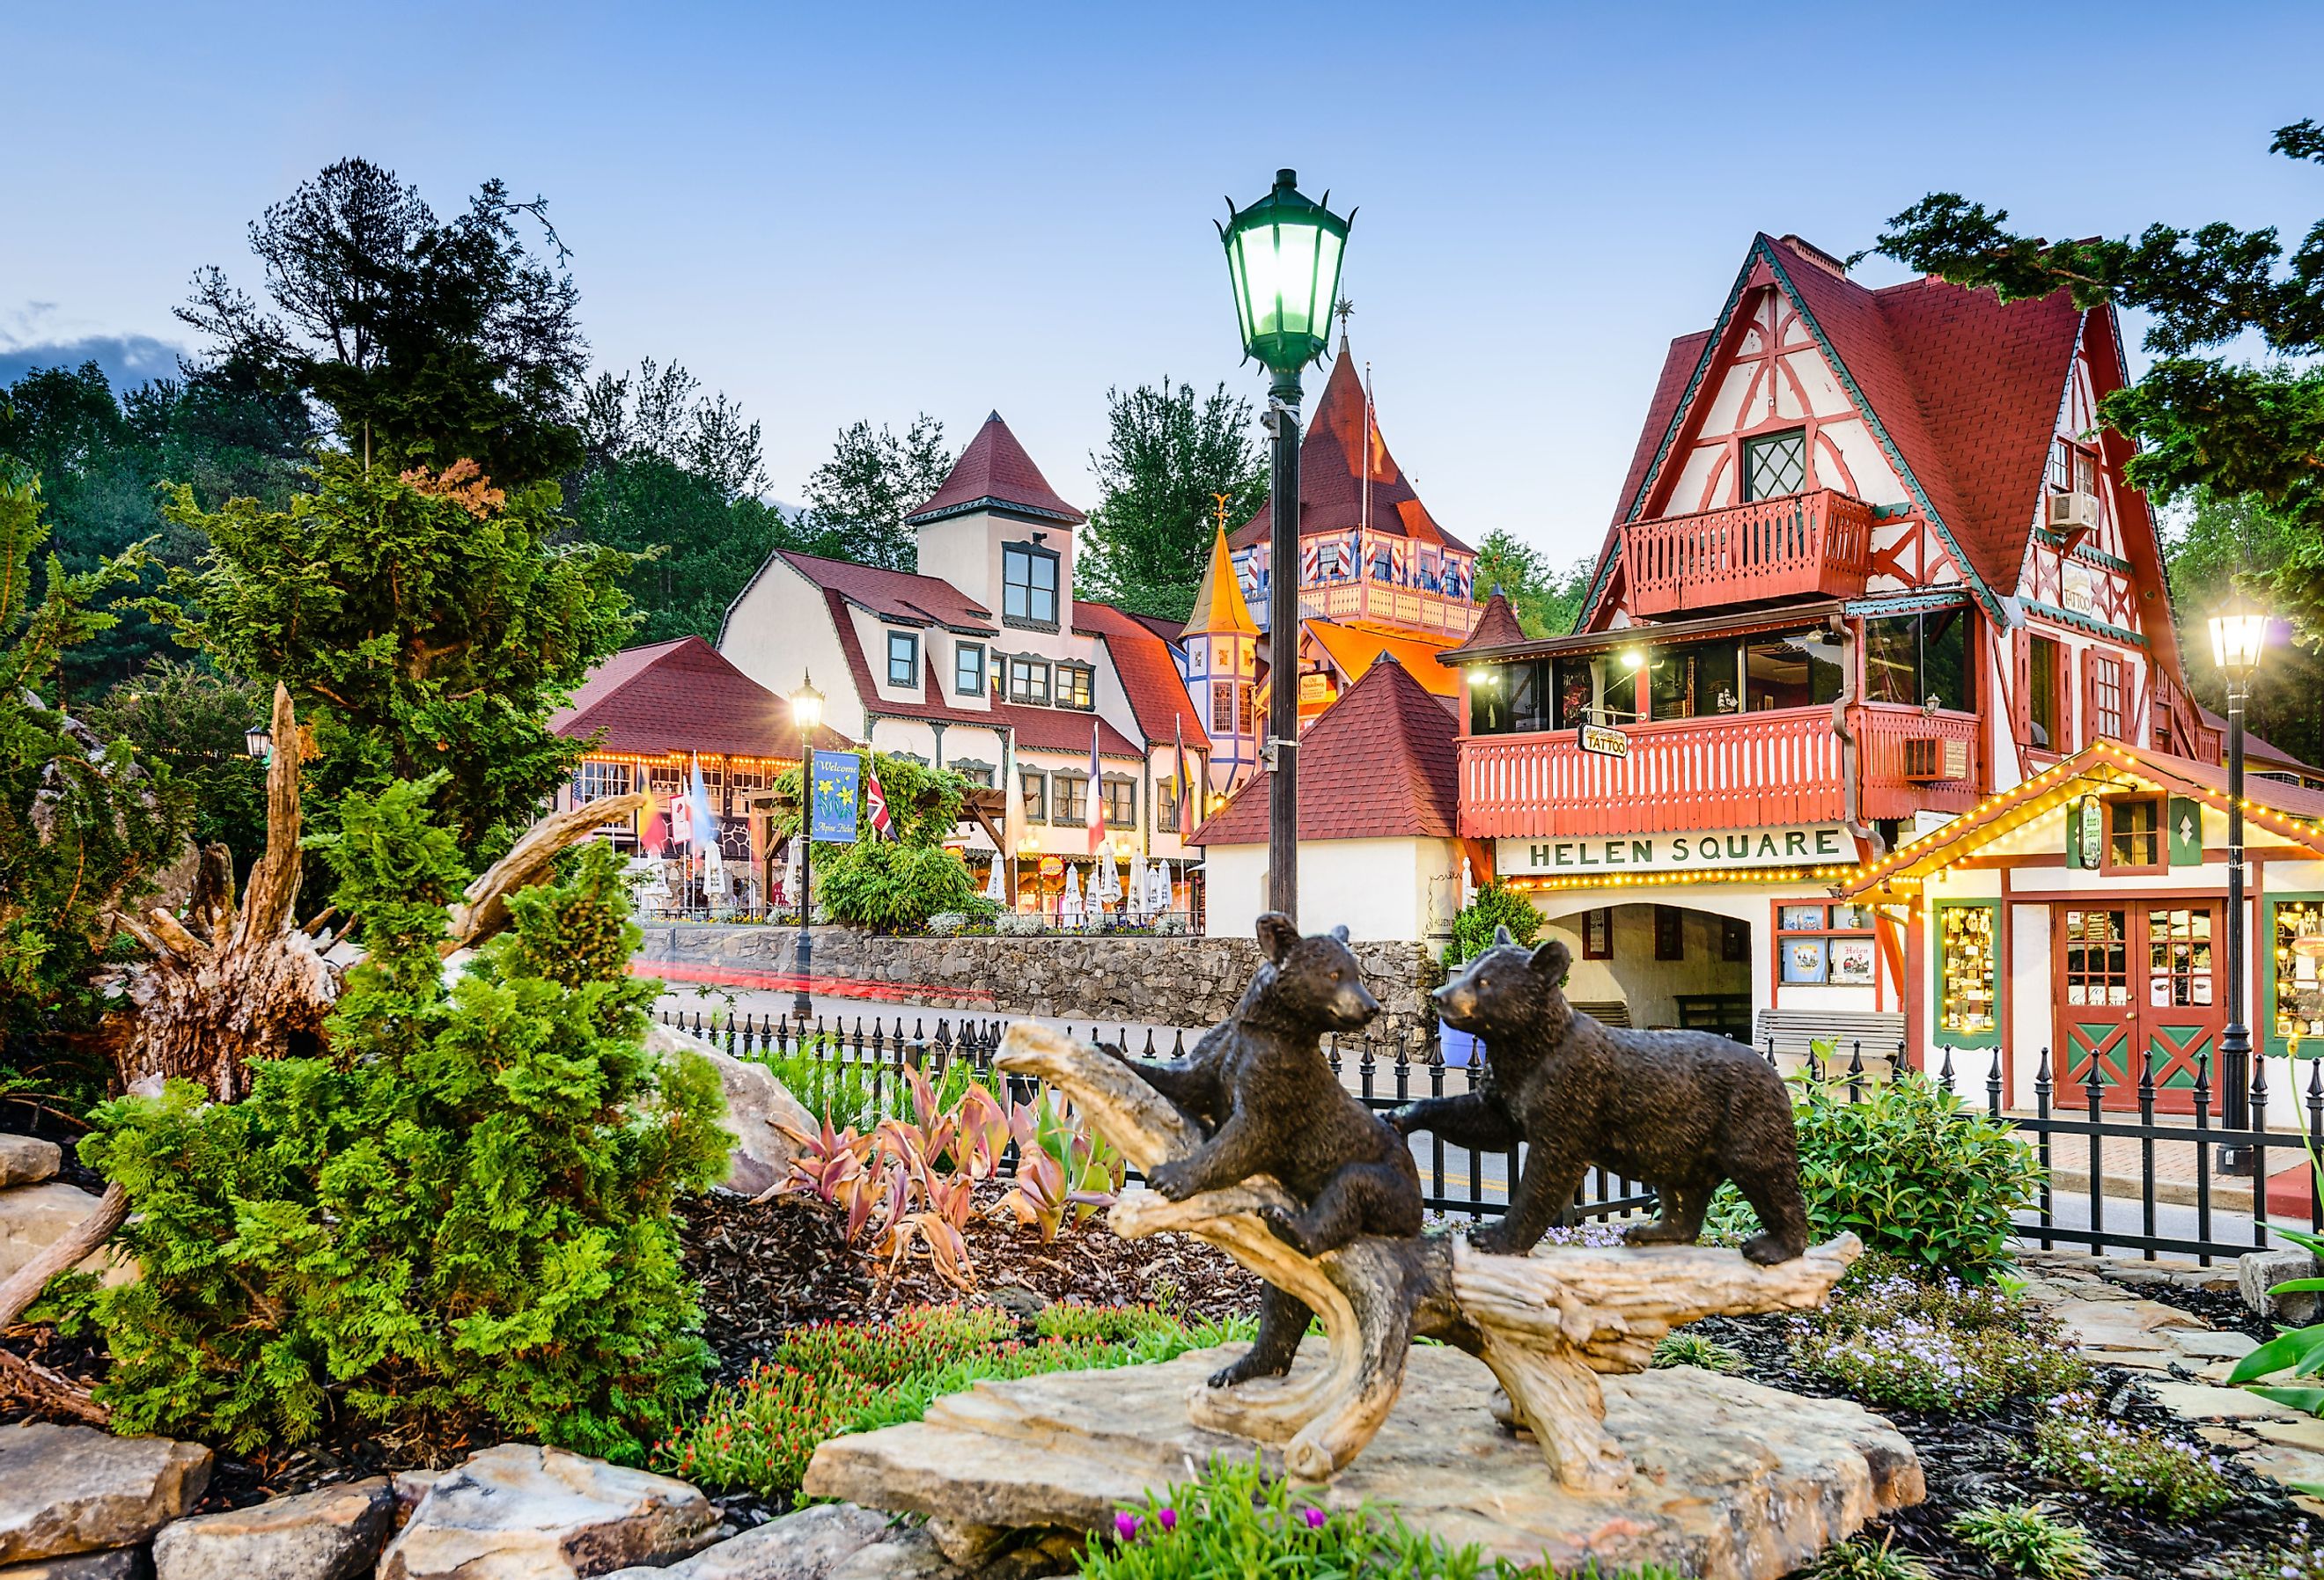 Helen Square, inspired by the Bavarian Alps, in North Georgia. Image credit Sean Pavone via Shutterstock